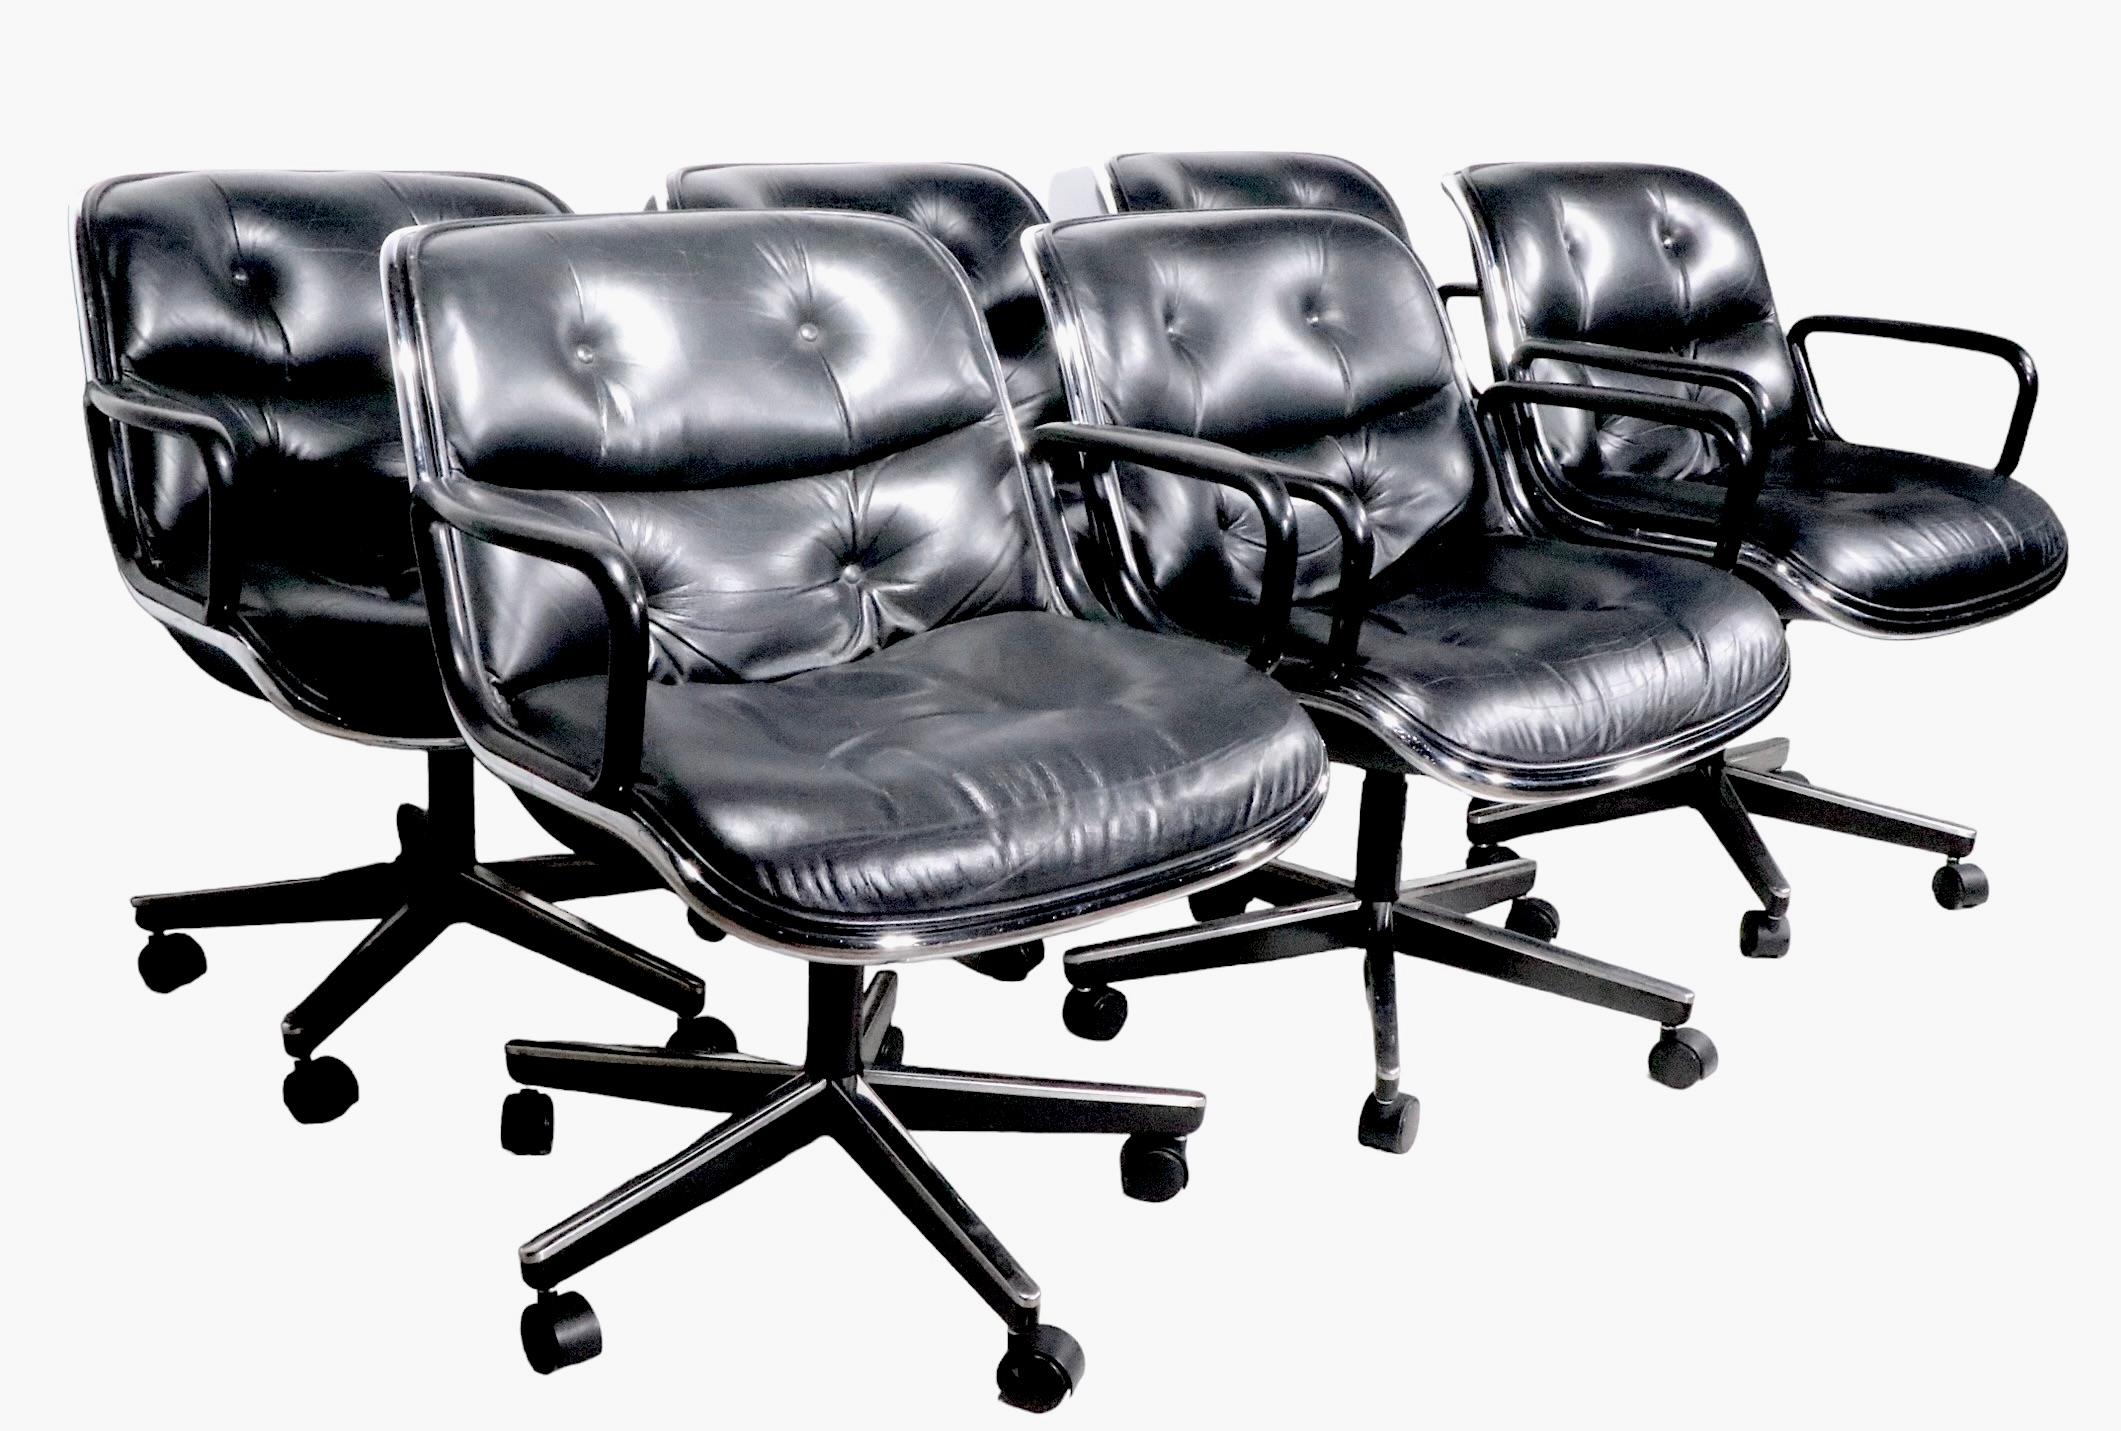 Steel 5 Knoll Swivel Tilt Office Chairs Designed by Charles Pollock for Knoll c 1960's